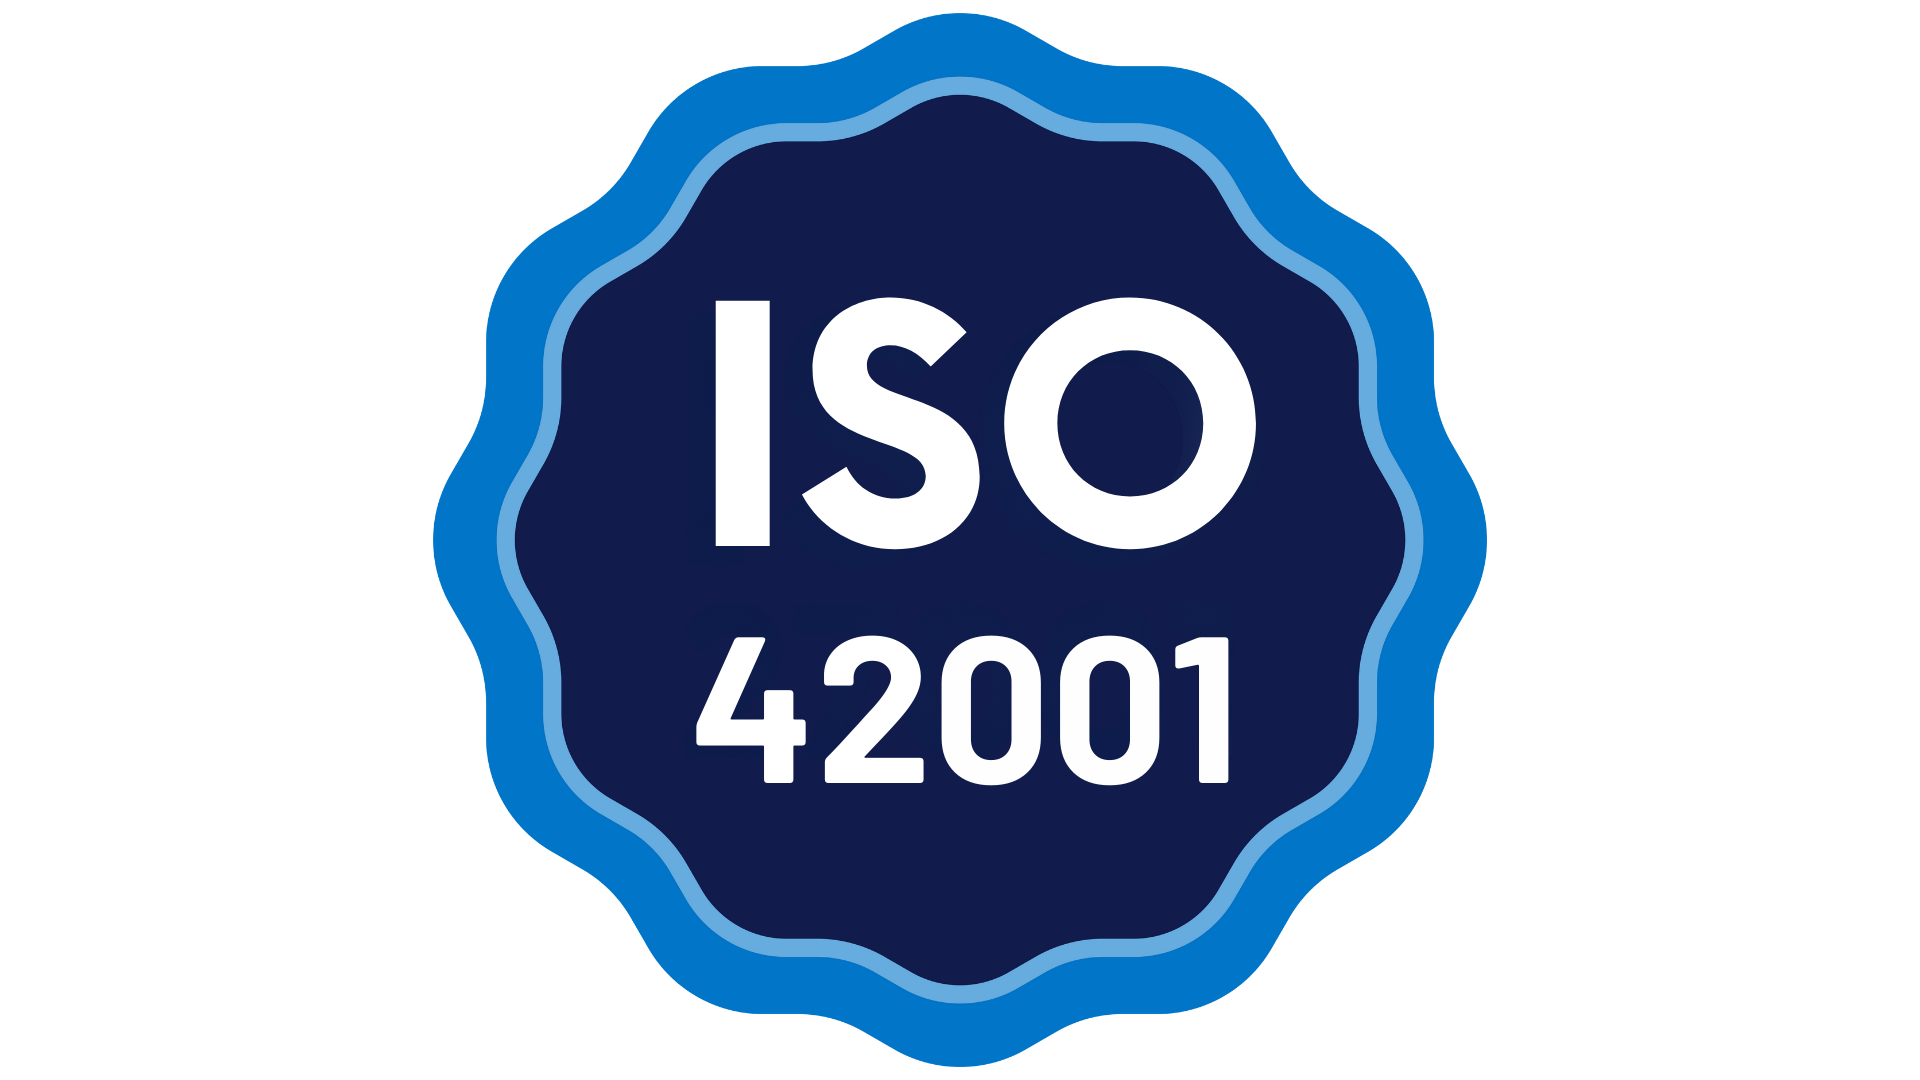 What is ISO/IEC 42001